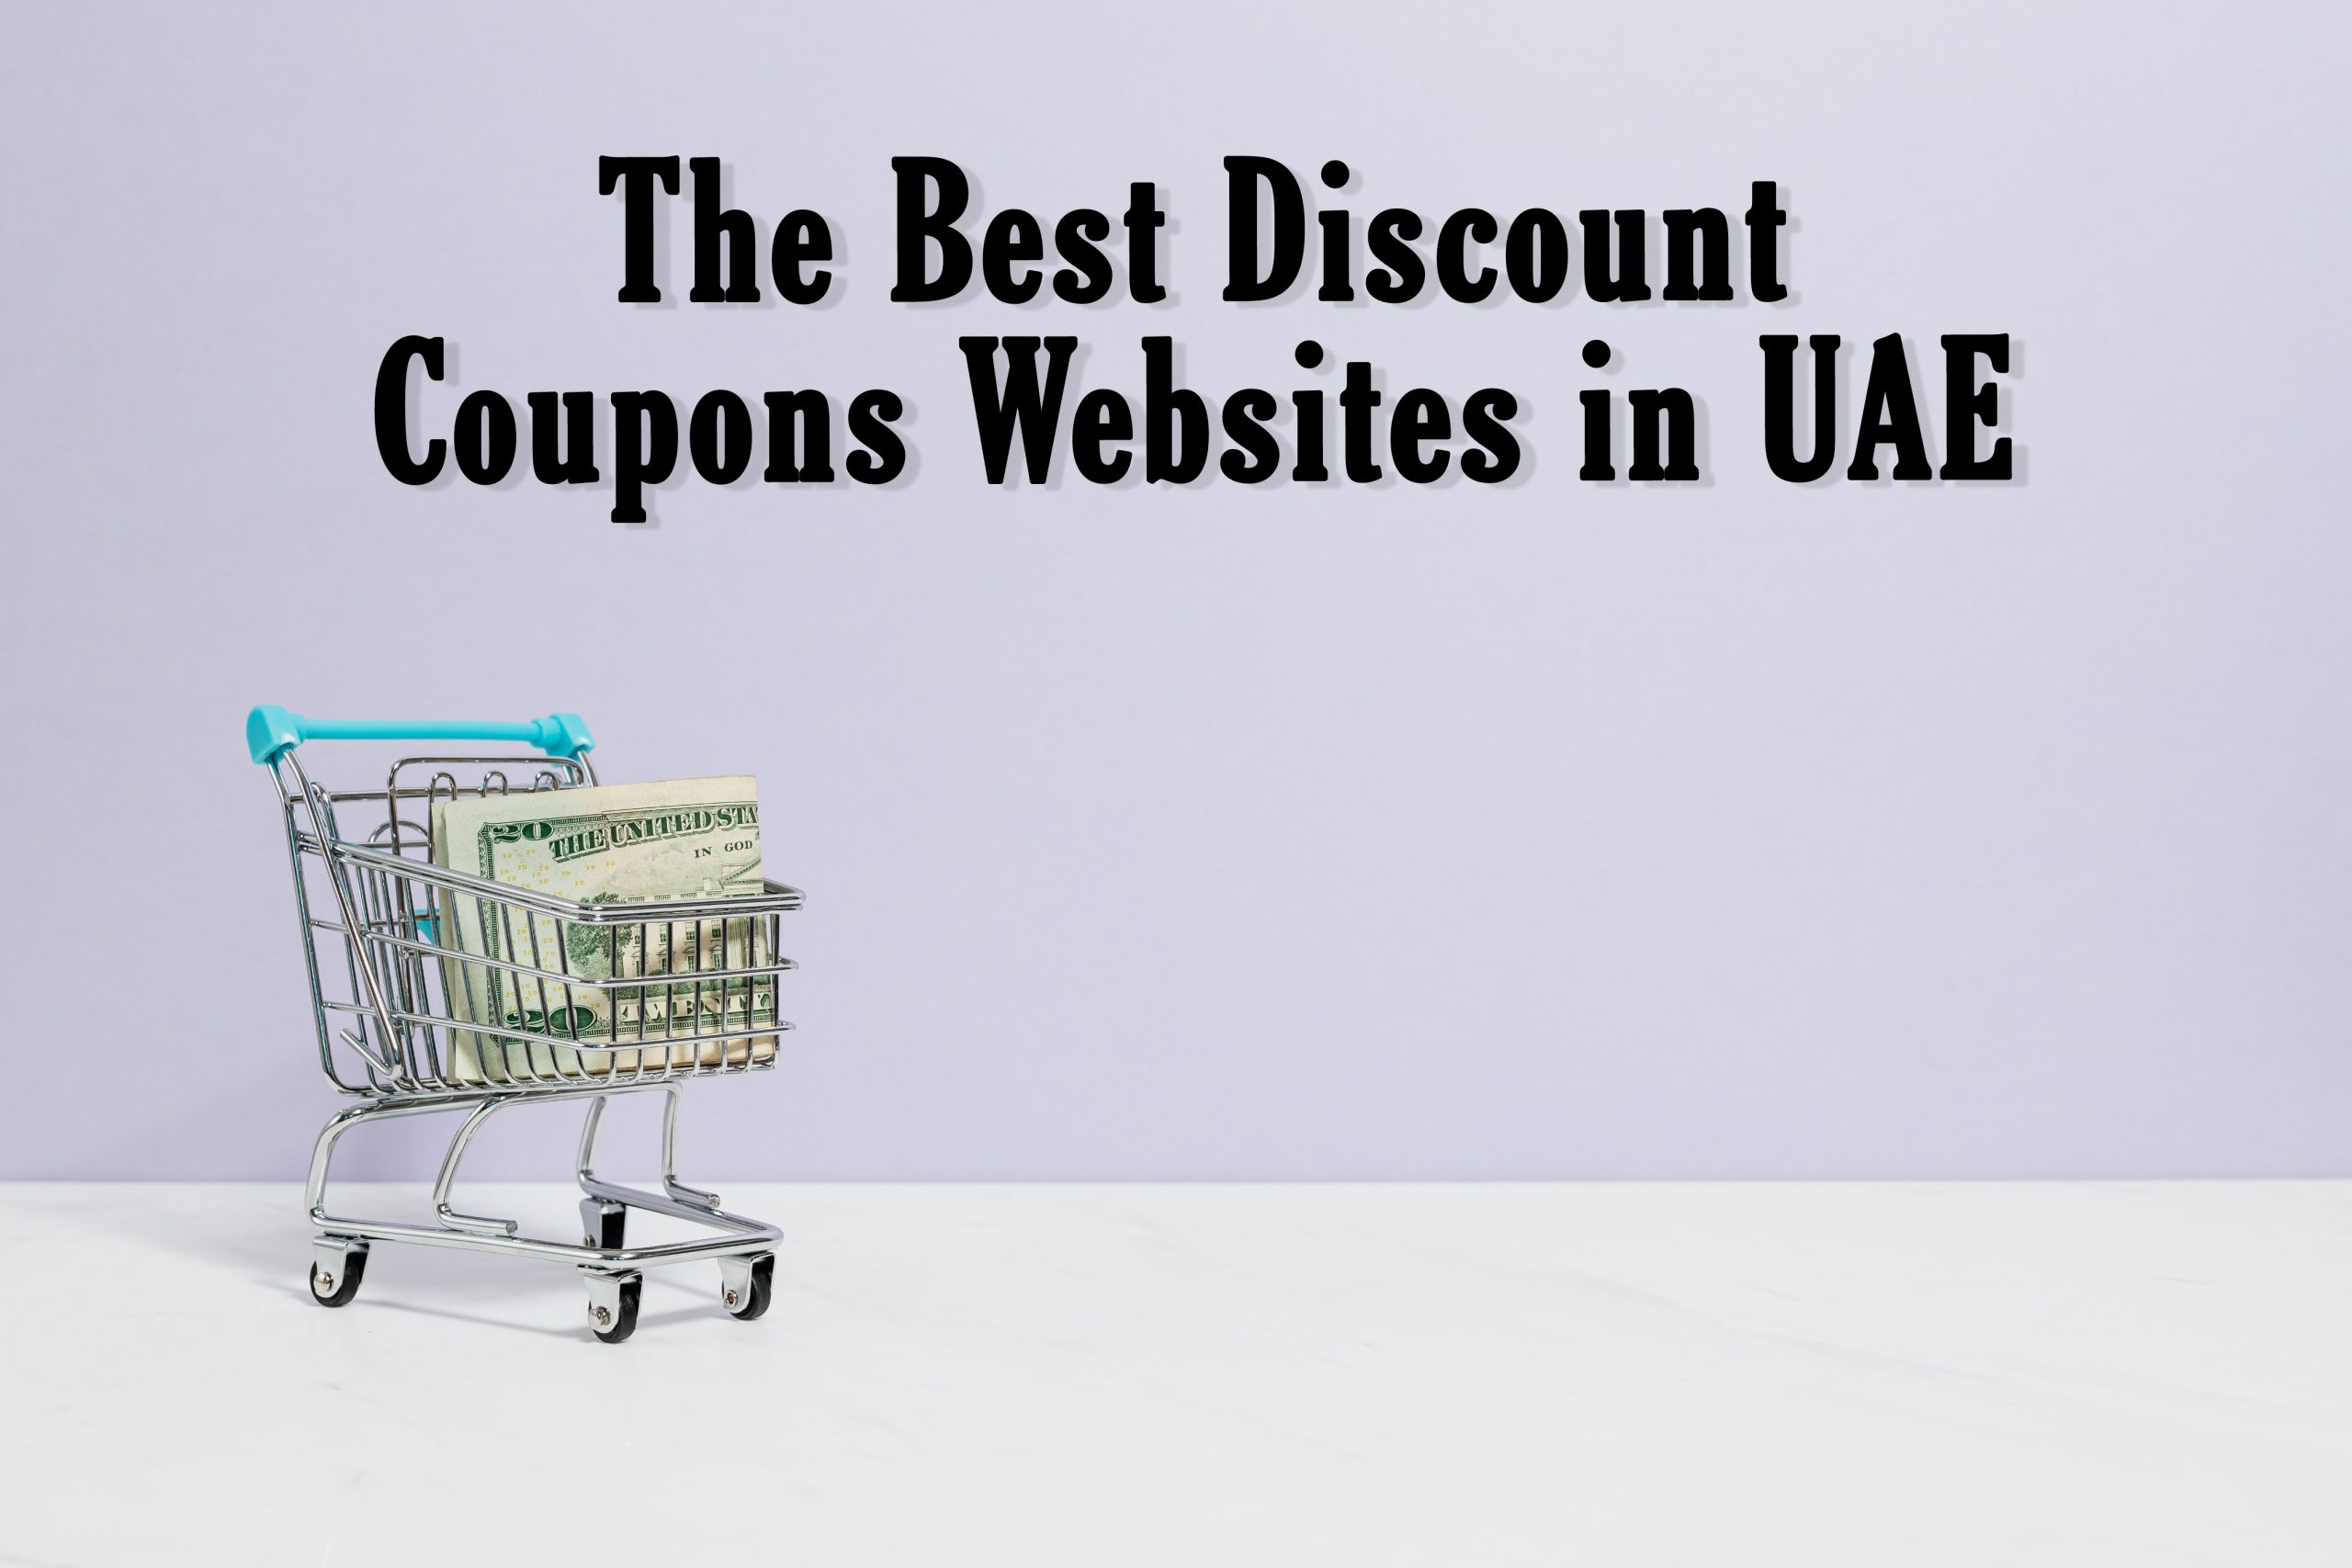 The Best Discount Coupons Websites in UAE